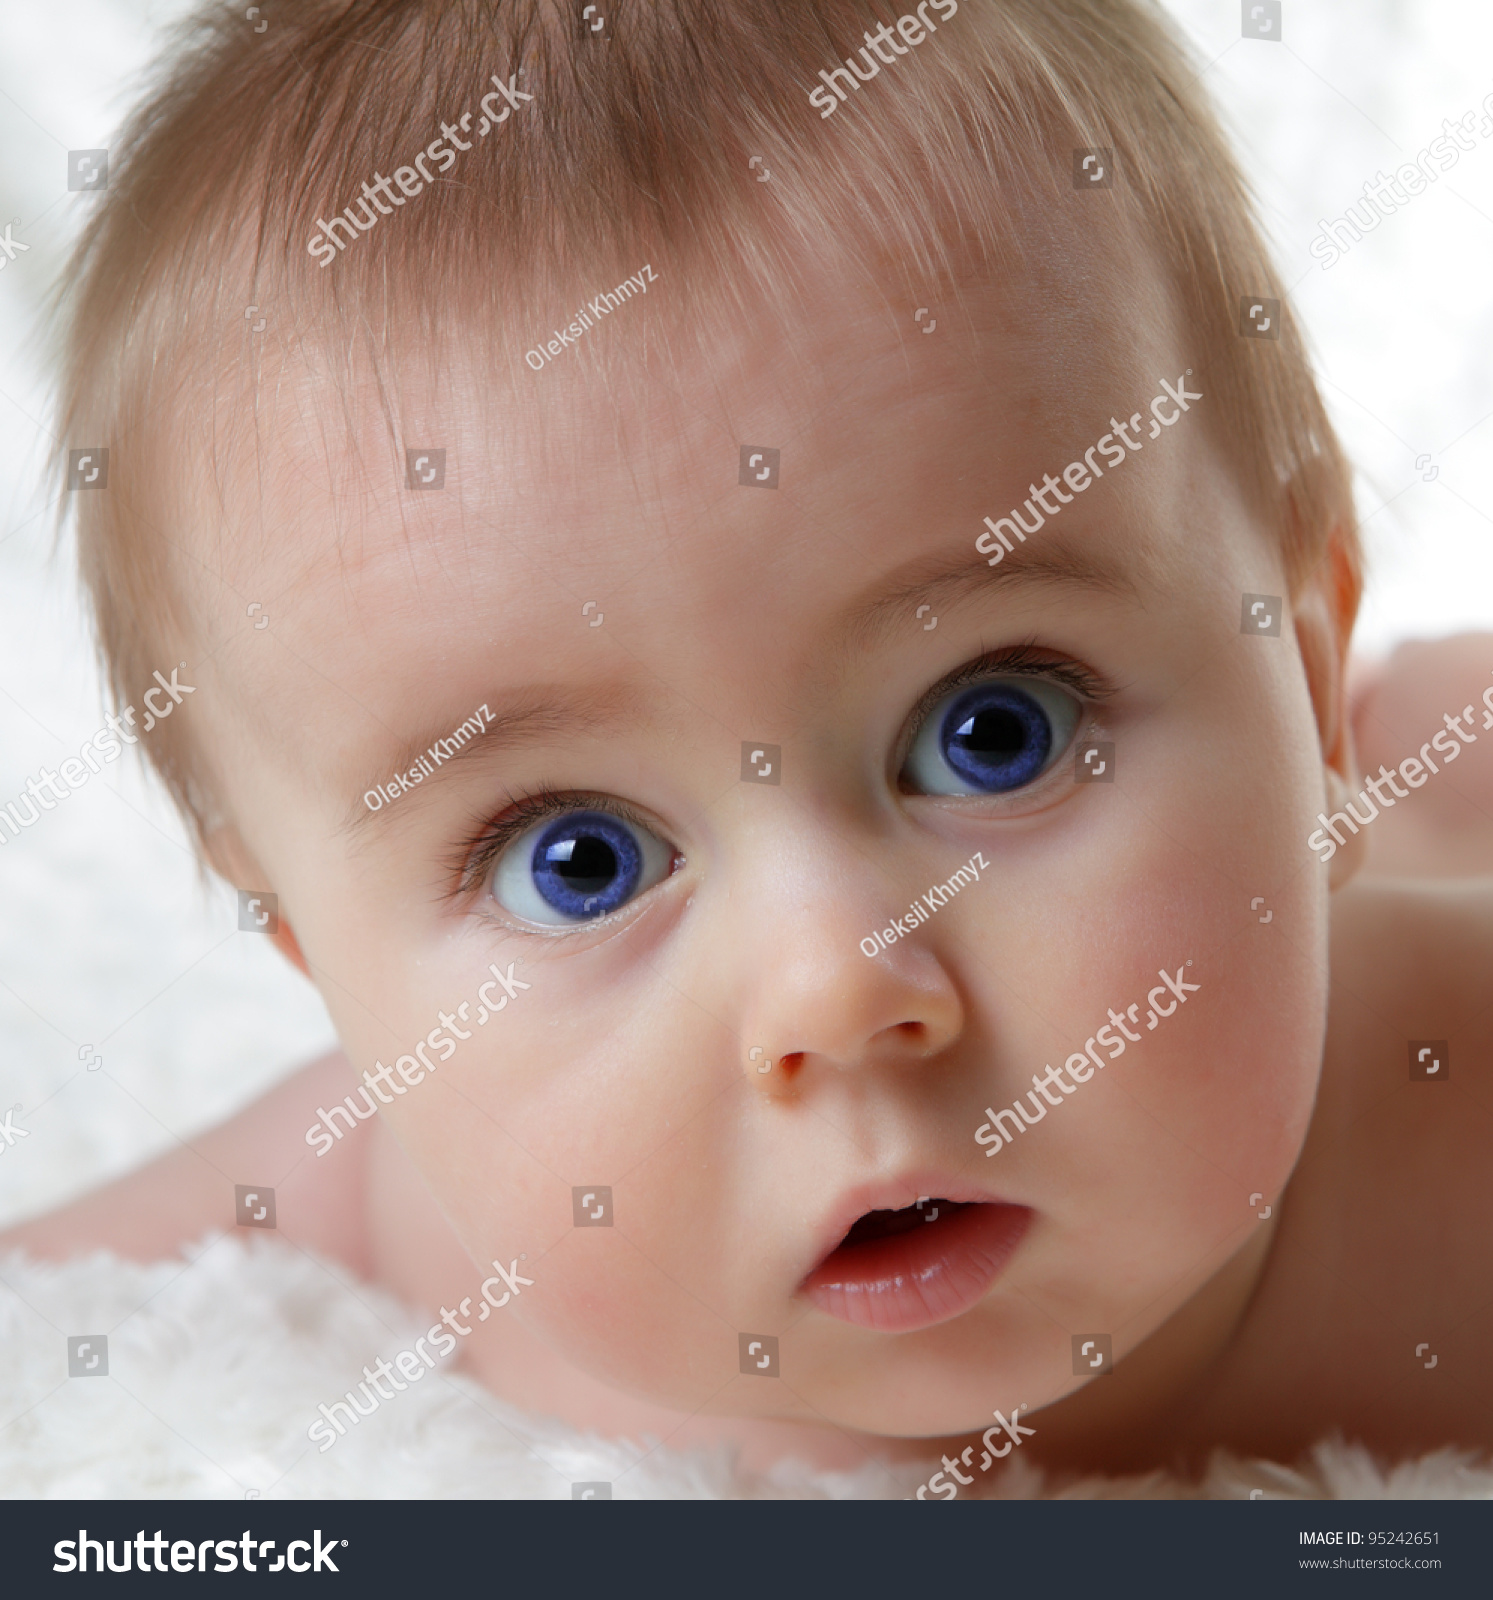 Head Shoot Of Cute Baby With Blue Eyes And Surprise Look Stock Photo